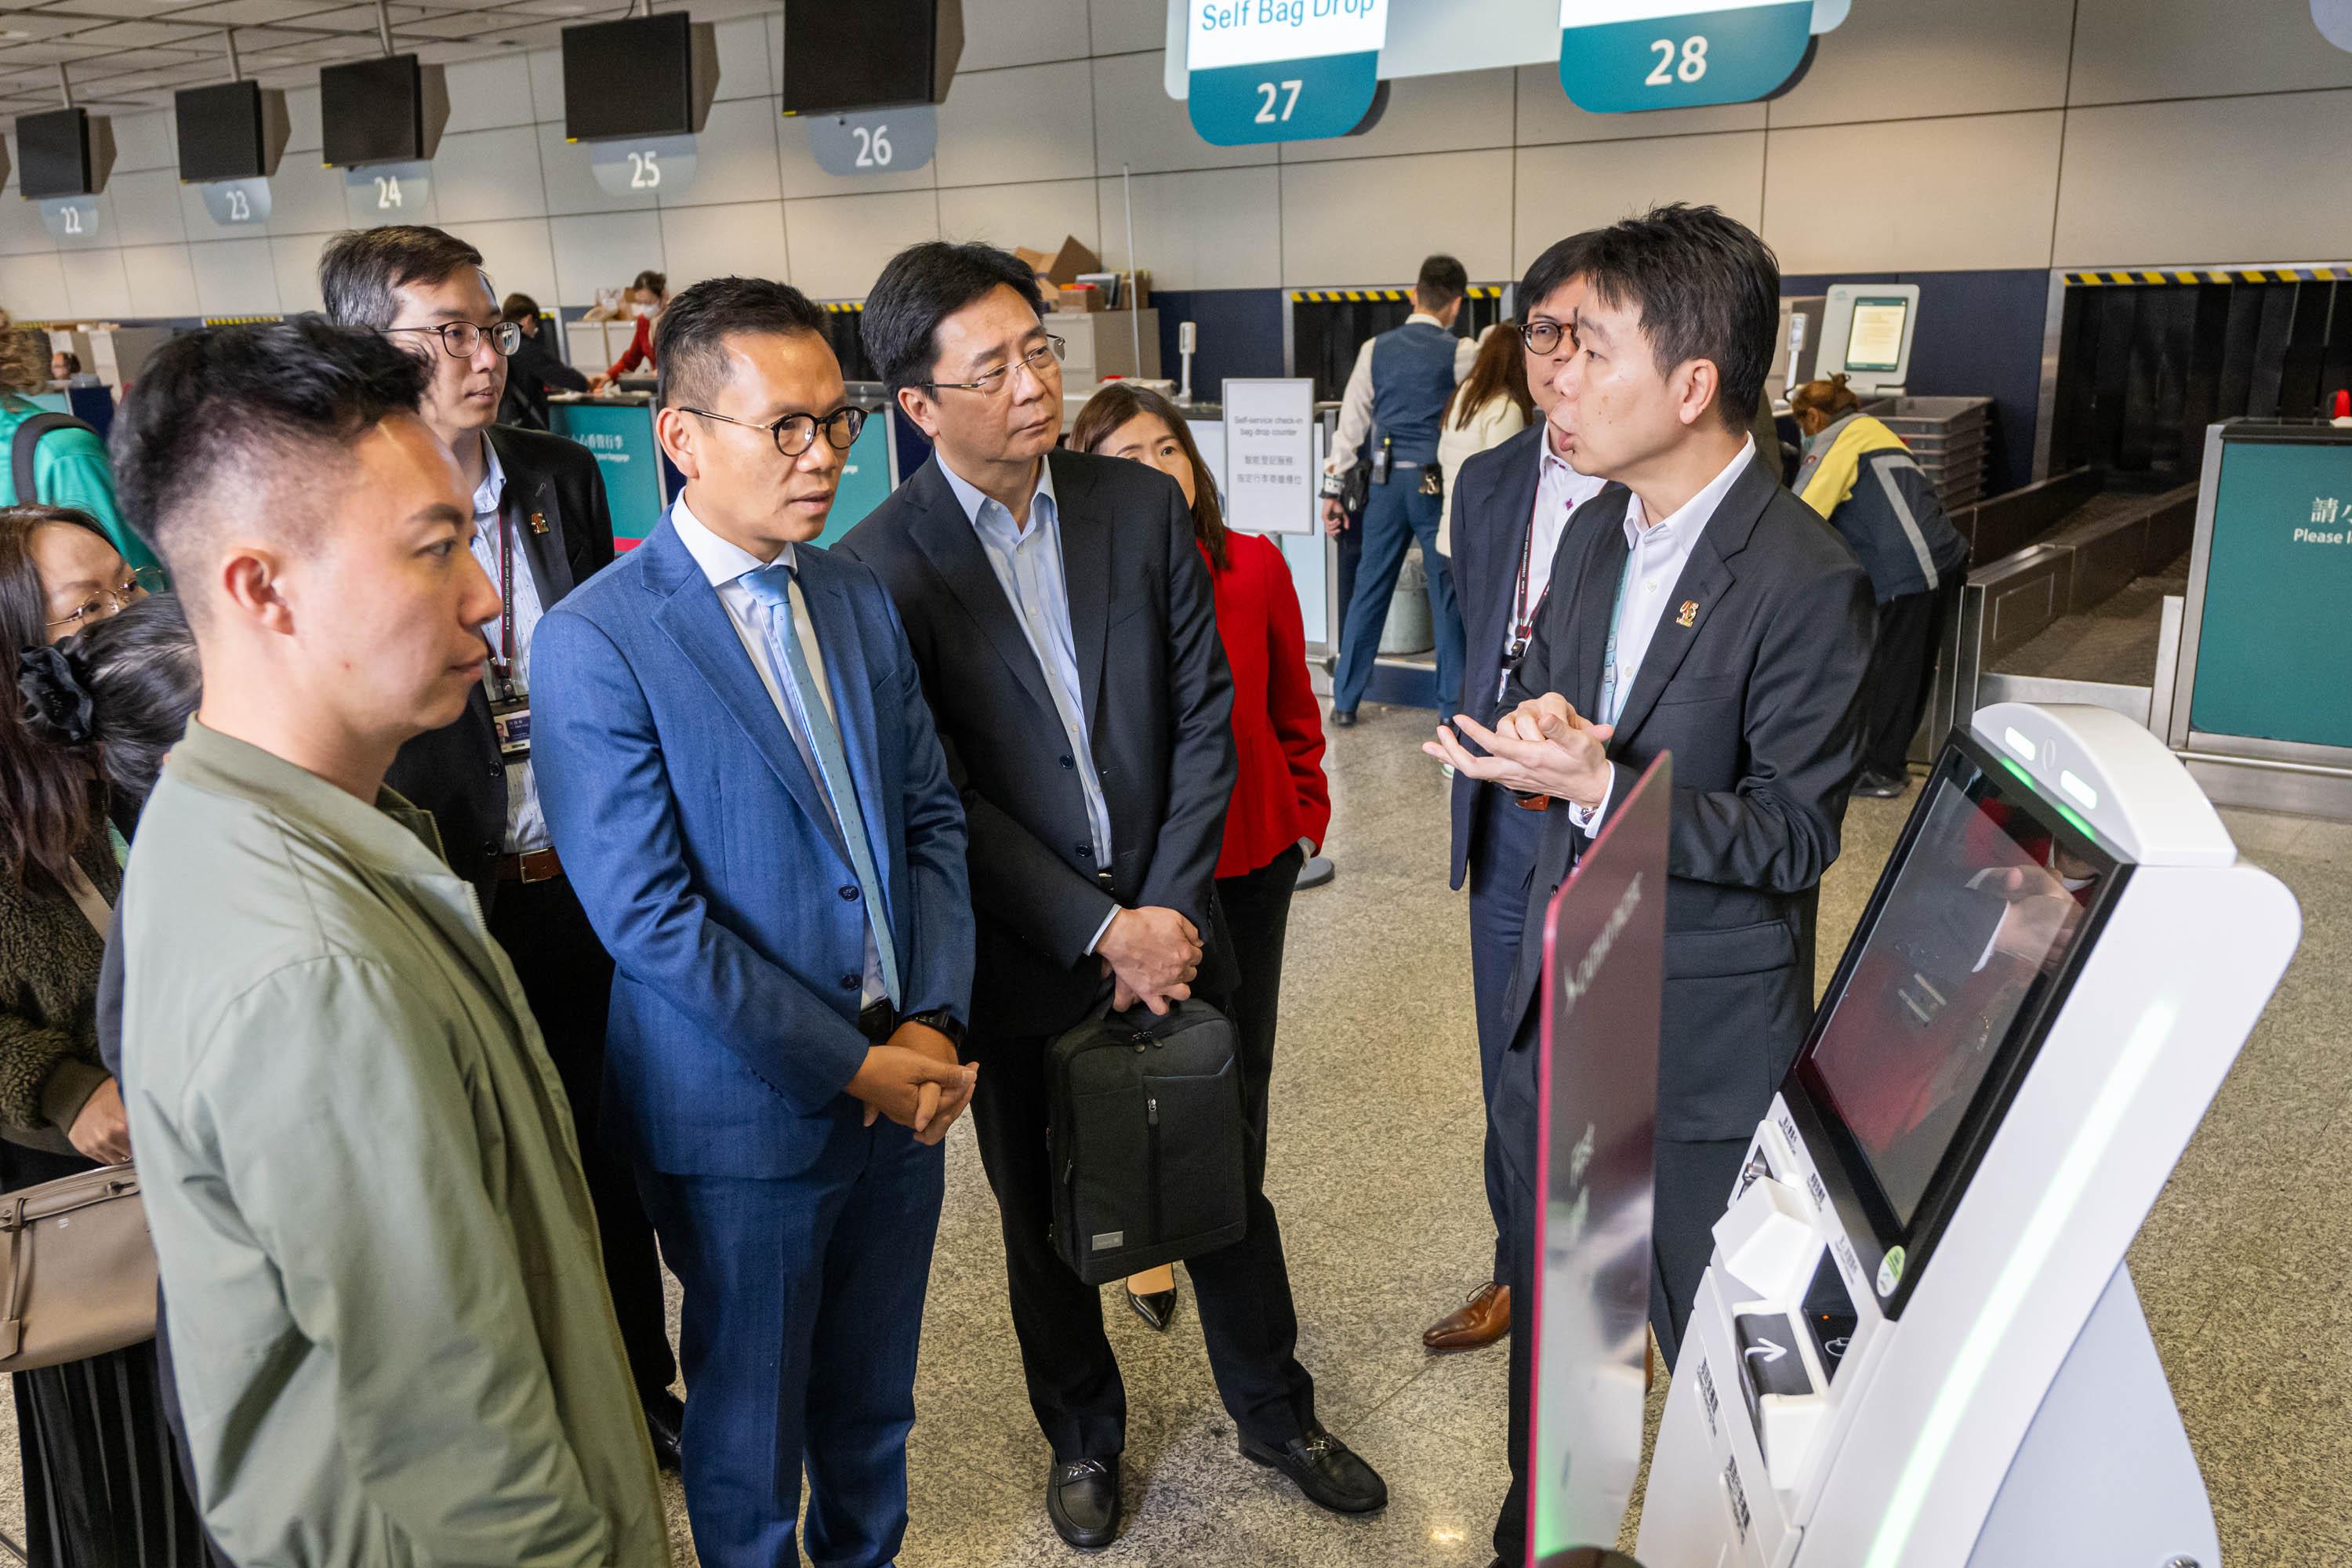 The Legislative Council (LegCo) Panel on Transport visited the in-town check-in service at the Airport Express Hong Kong Station today (February 27). Photo shows LegCo members receiving a briefing on the operation of in-town check-in service and check-in baggage system by the representatives of the MTR Corporation Limited.